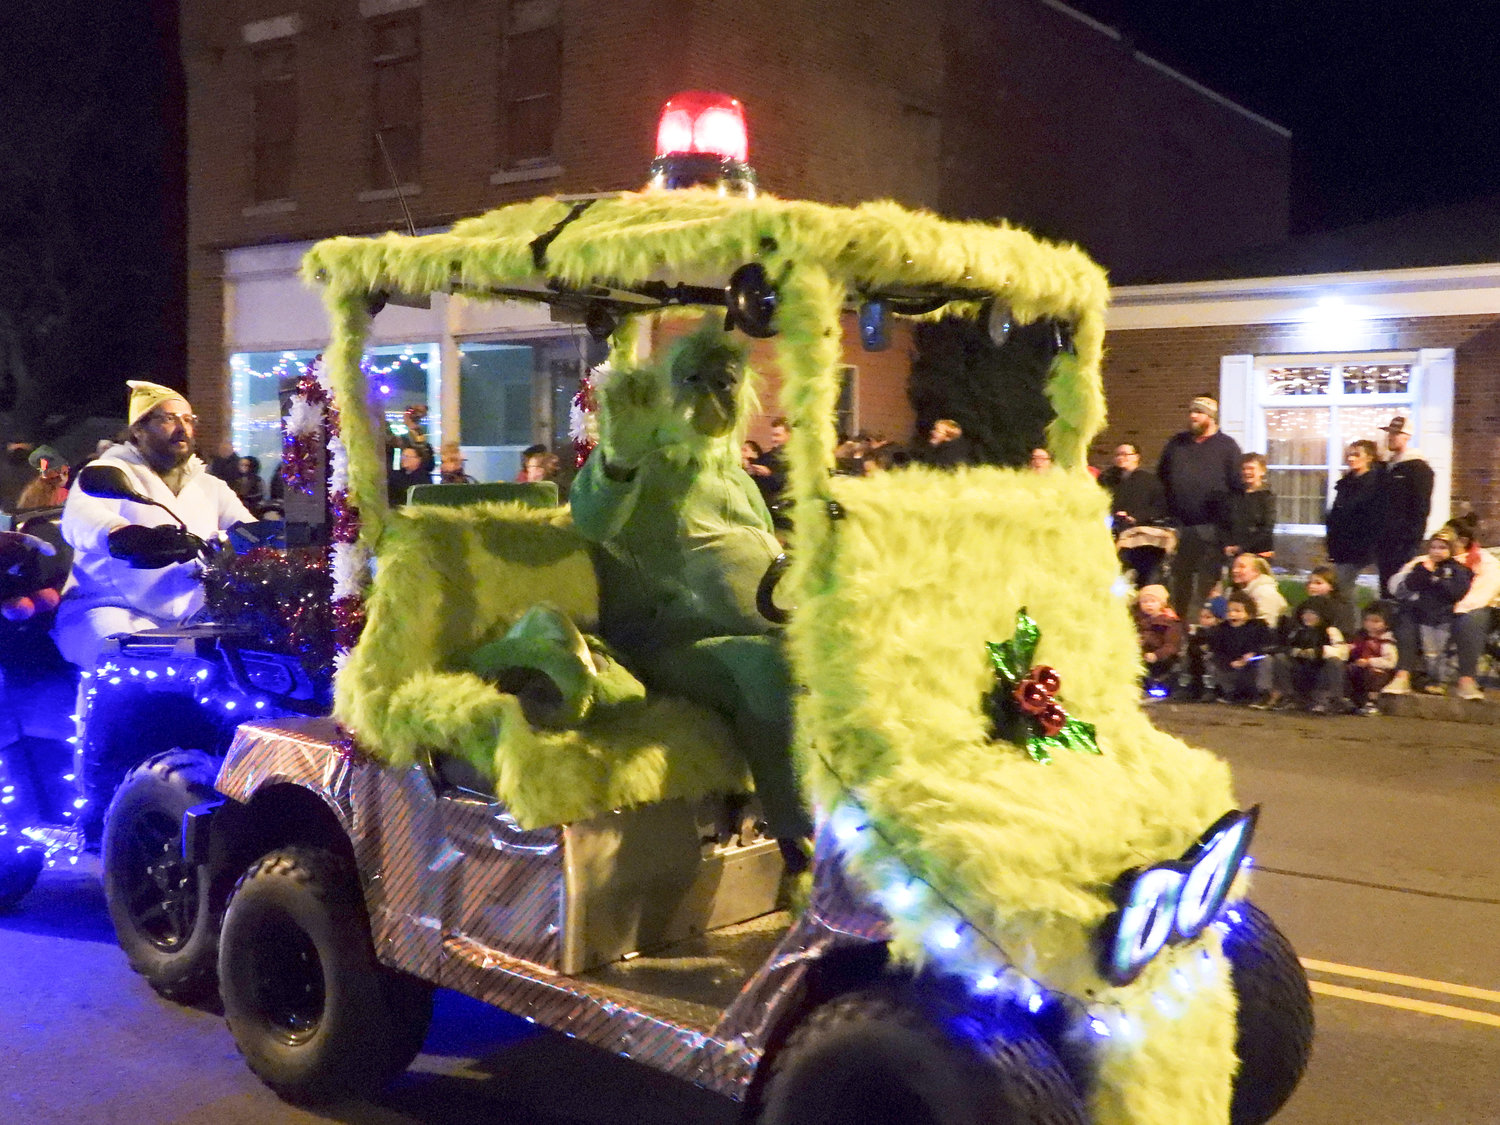 The Canastota Parade of Lights saw people fill the streets Saturday night to welcome in the holiday season. The Grinch waves to people in attendance.